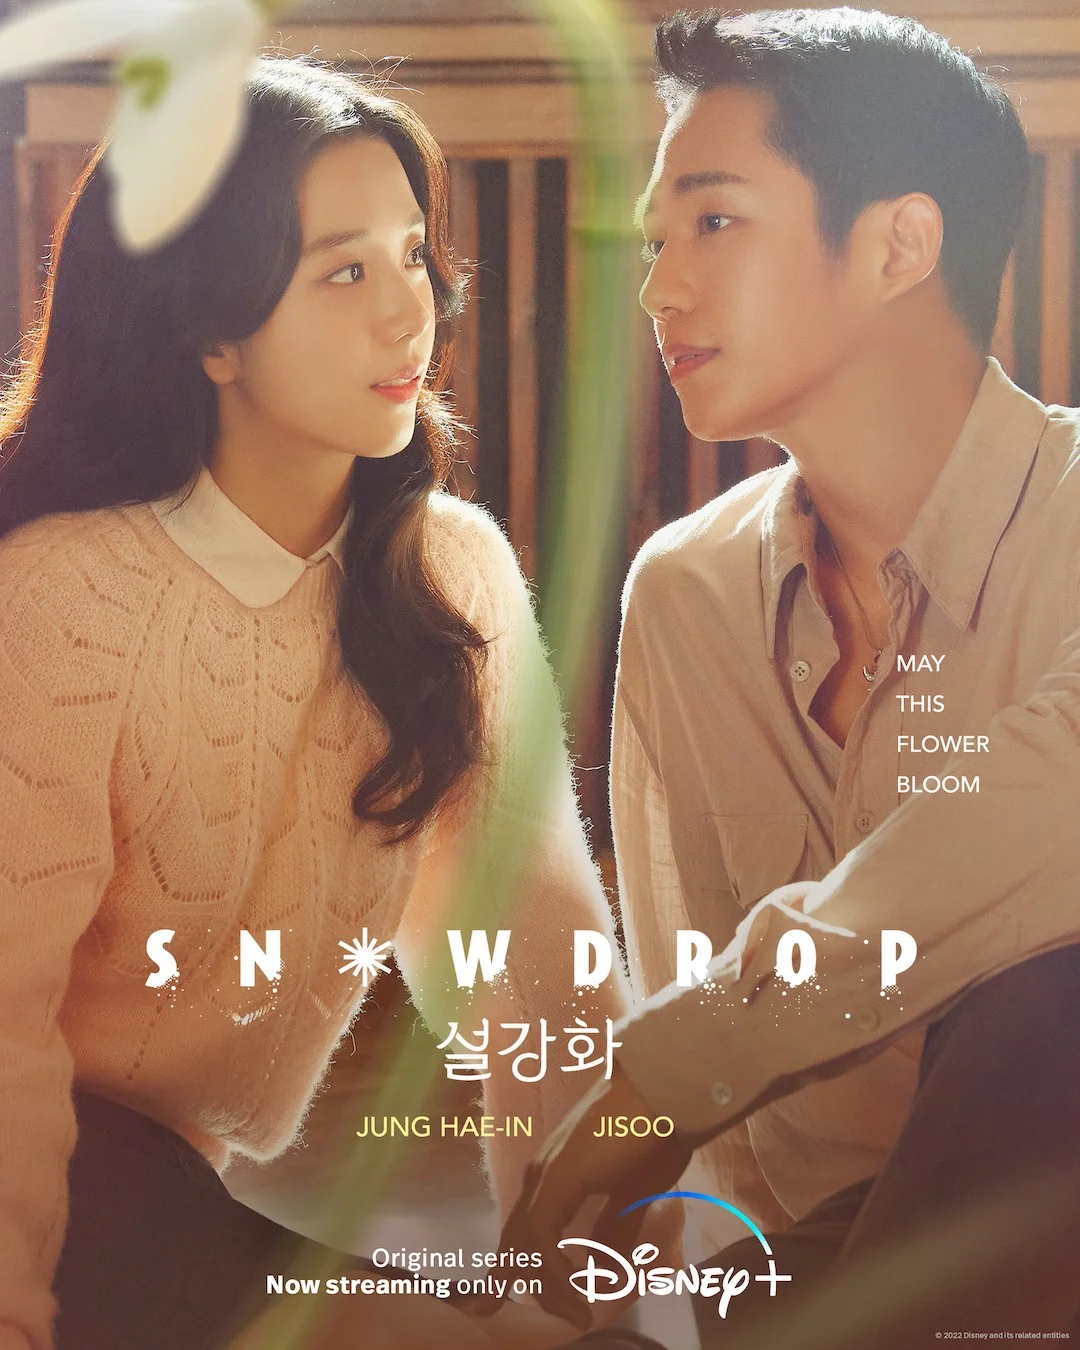 Read More About The Article Snowdrop S01 (Complete) | Korean Drama